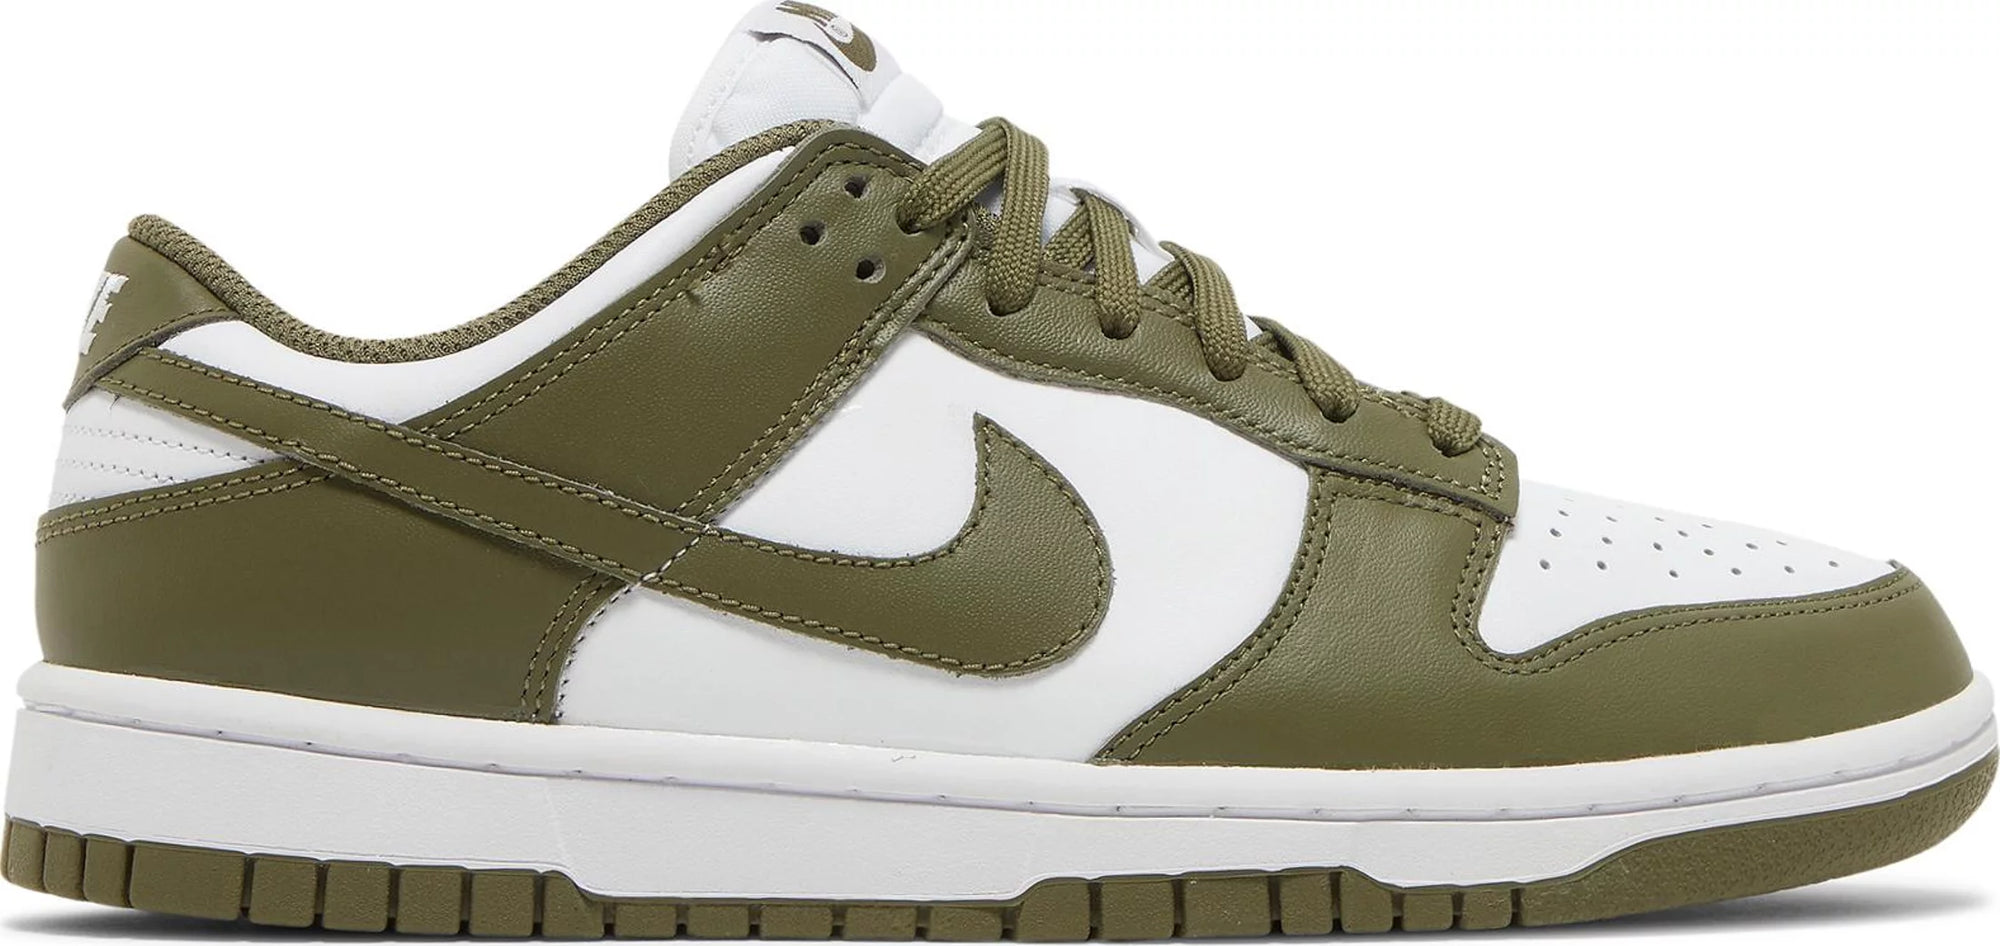 Nike Dunk Low - Olive Green